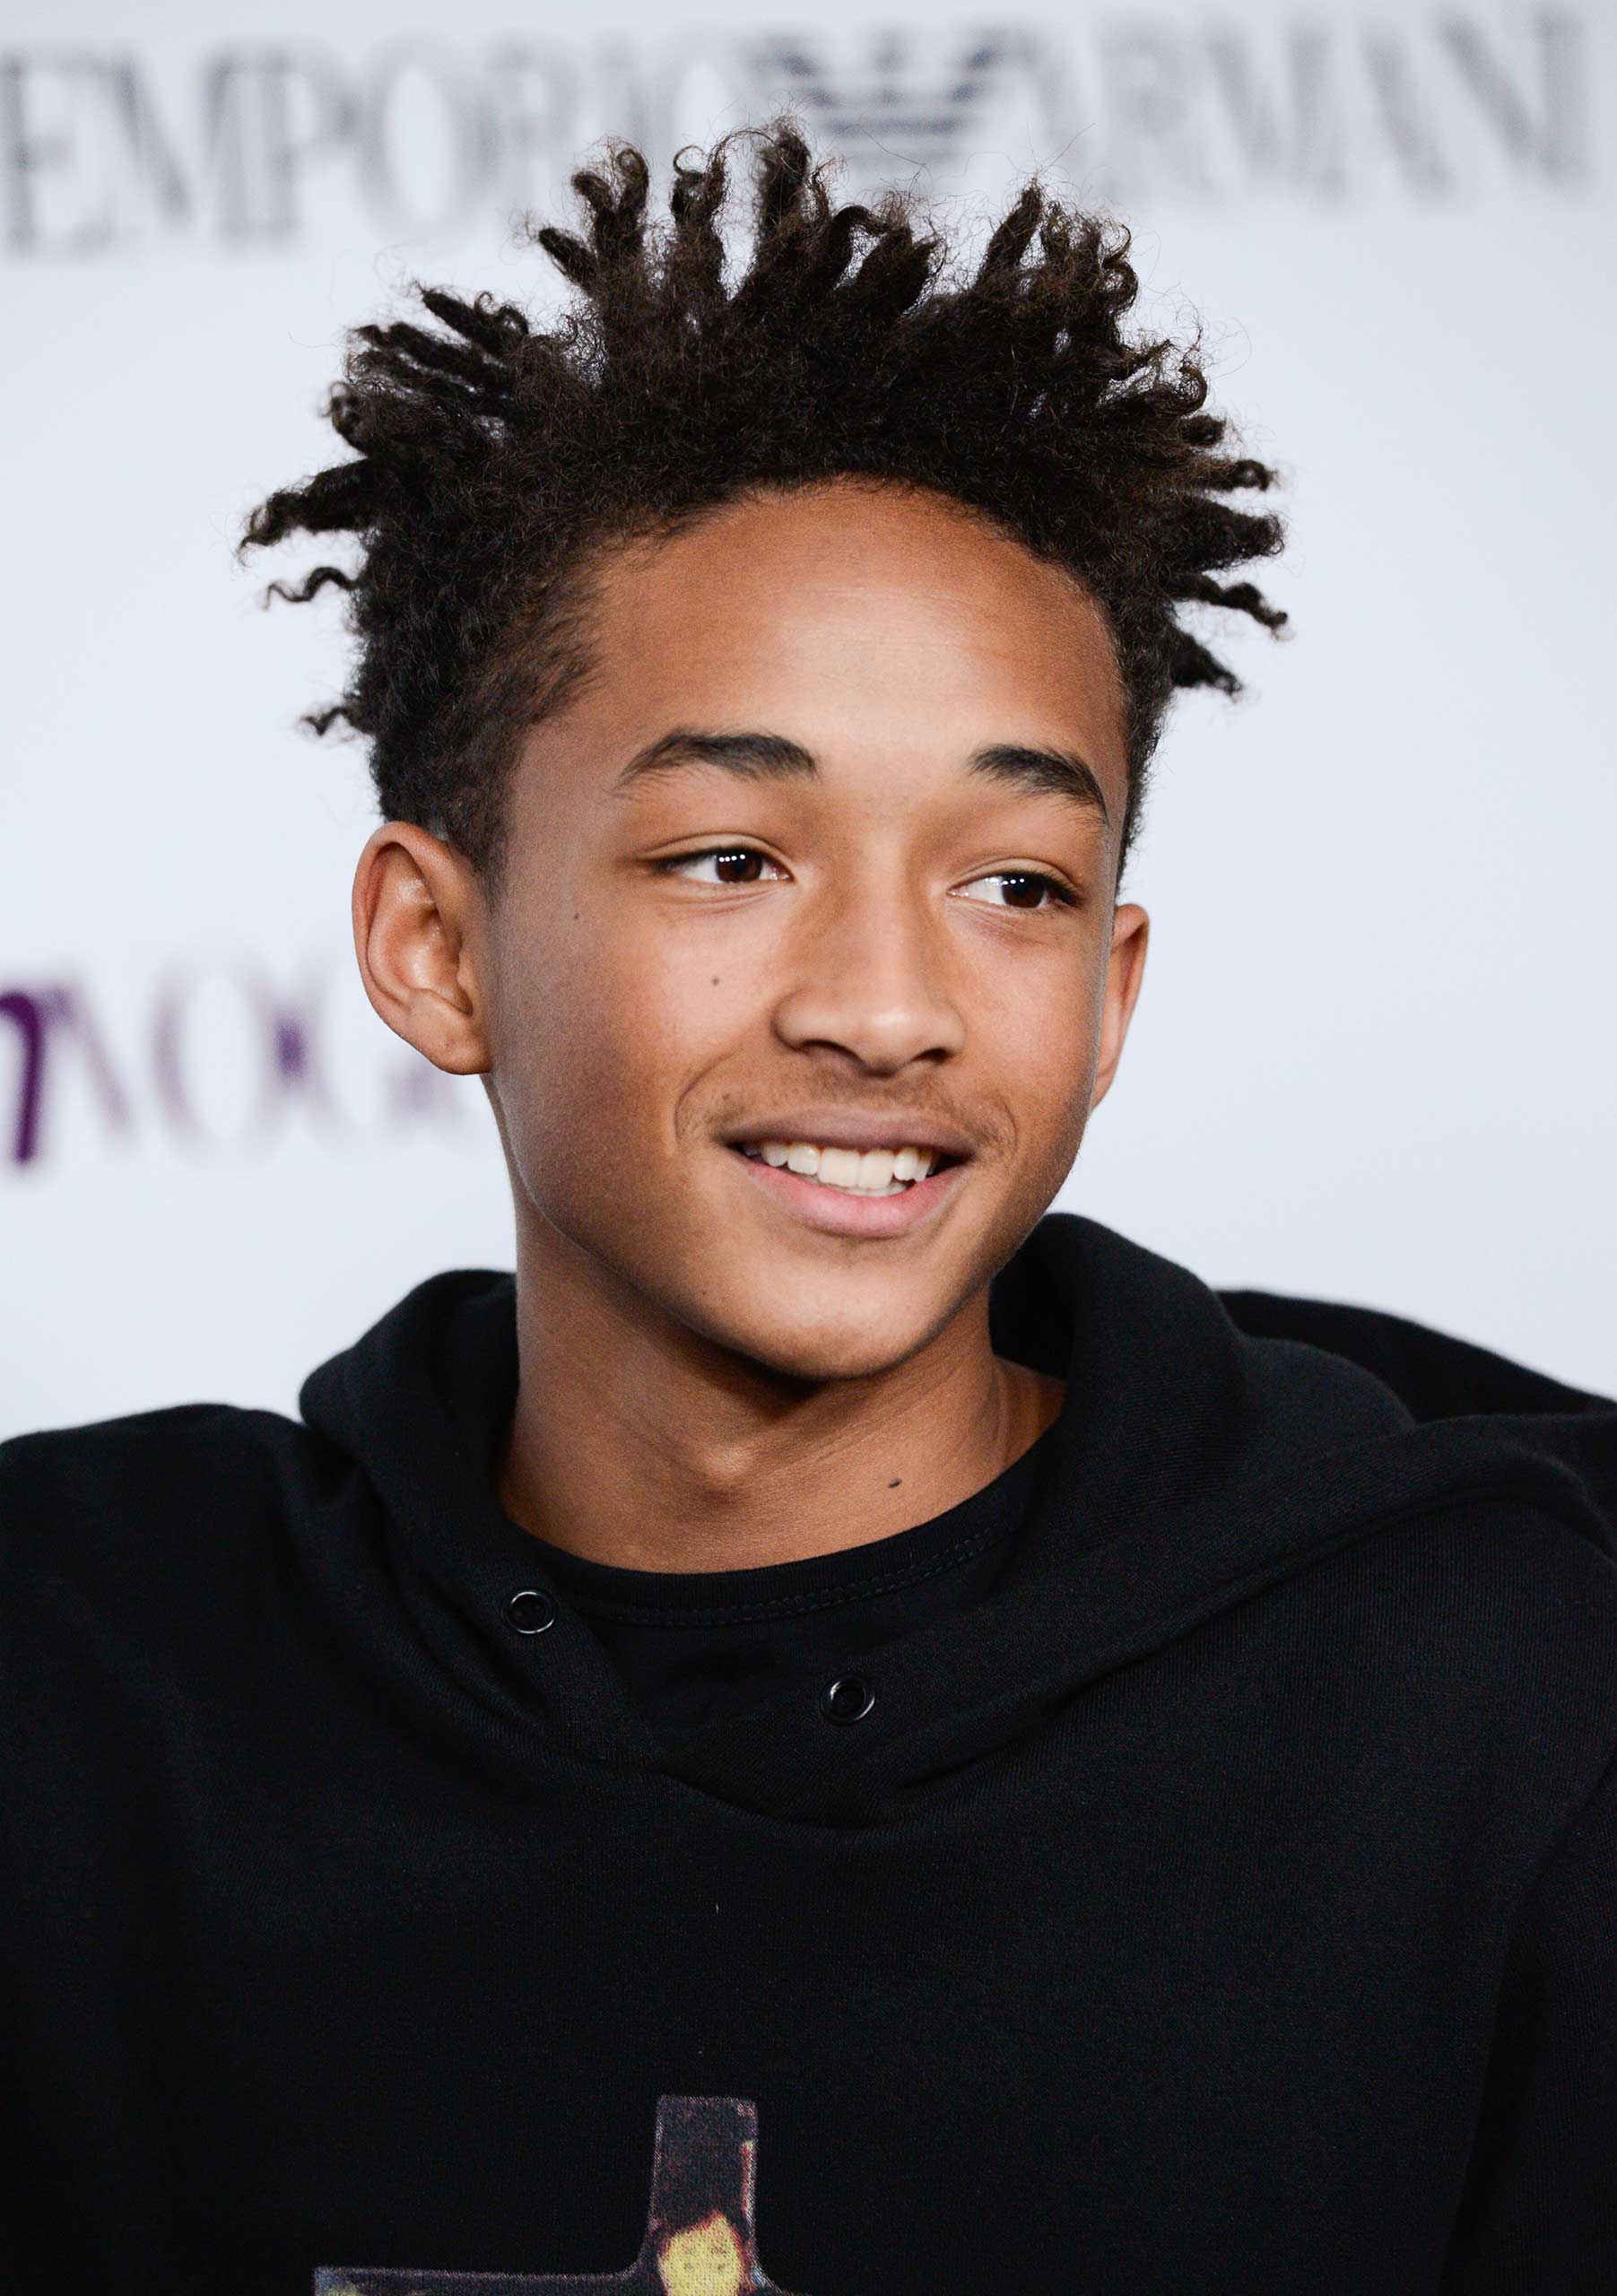 Actor Jaden Smith arrives at the Teen Vogue Young Hollywood issue party on Friday, Sept. 27, 2013 in Los Angeles. (Photo by Dan Steinberg/Invision/AP)